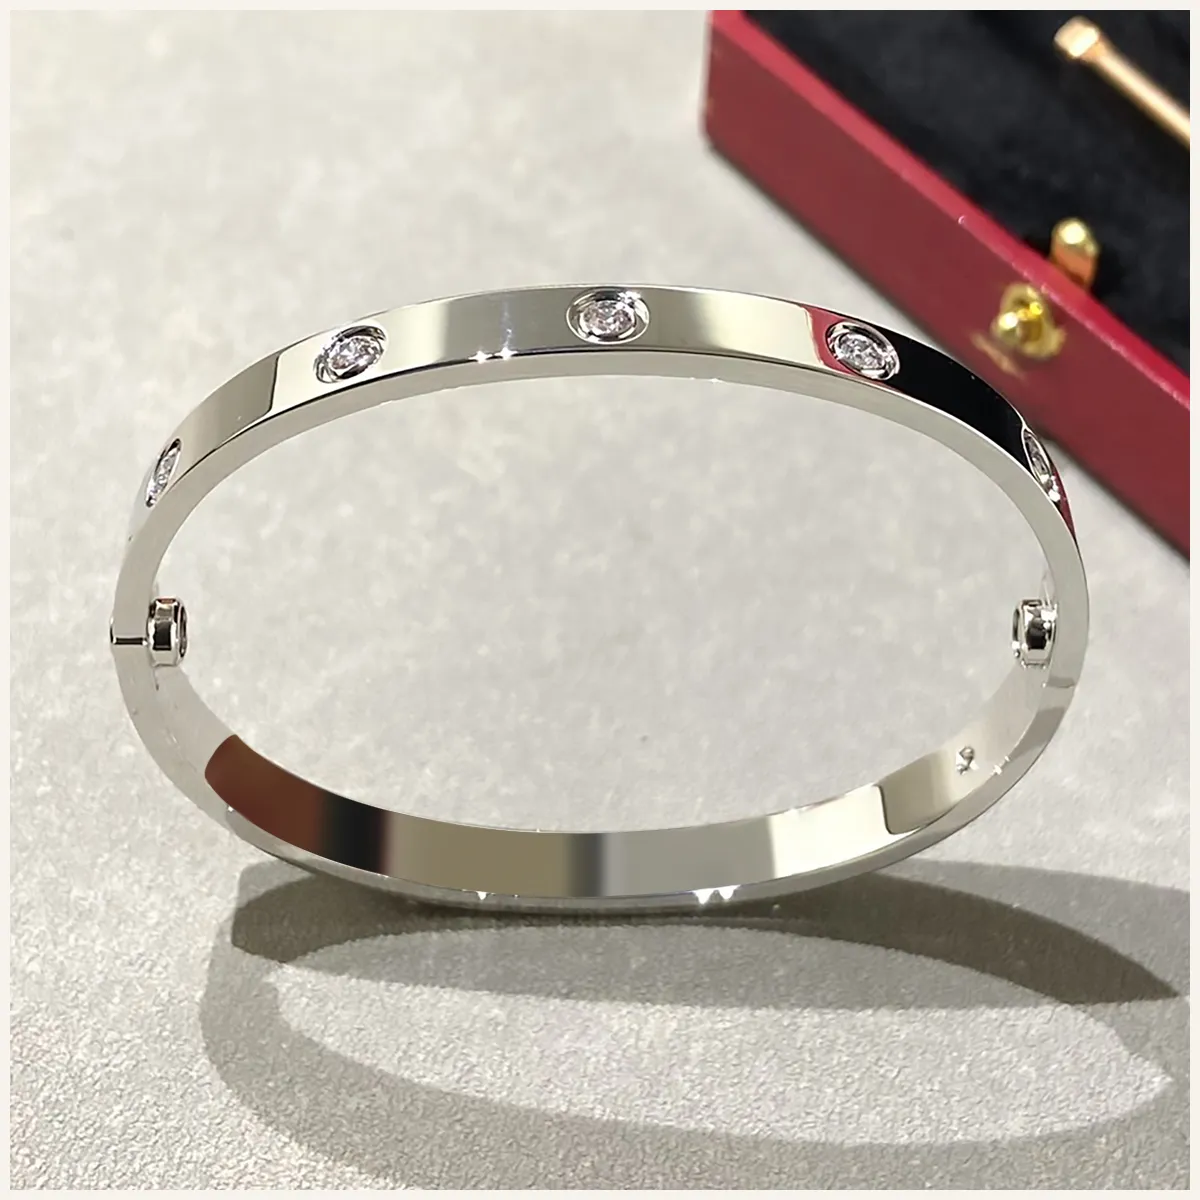 Argos Product Support for Sterling Silver Expander Teddy Bangle (224/6460)